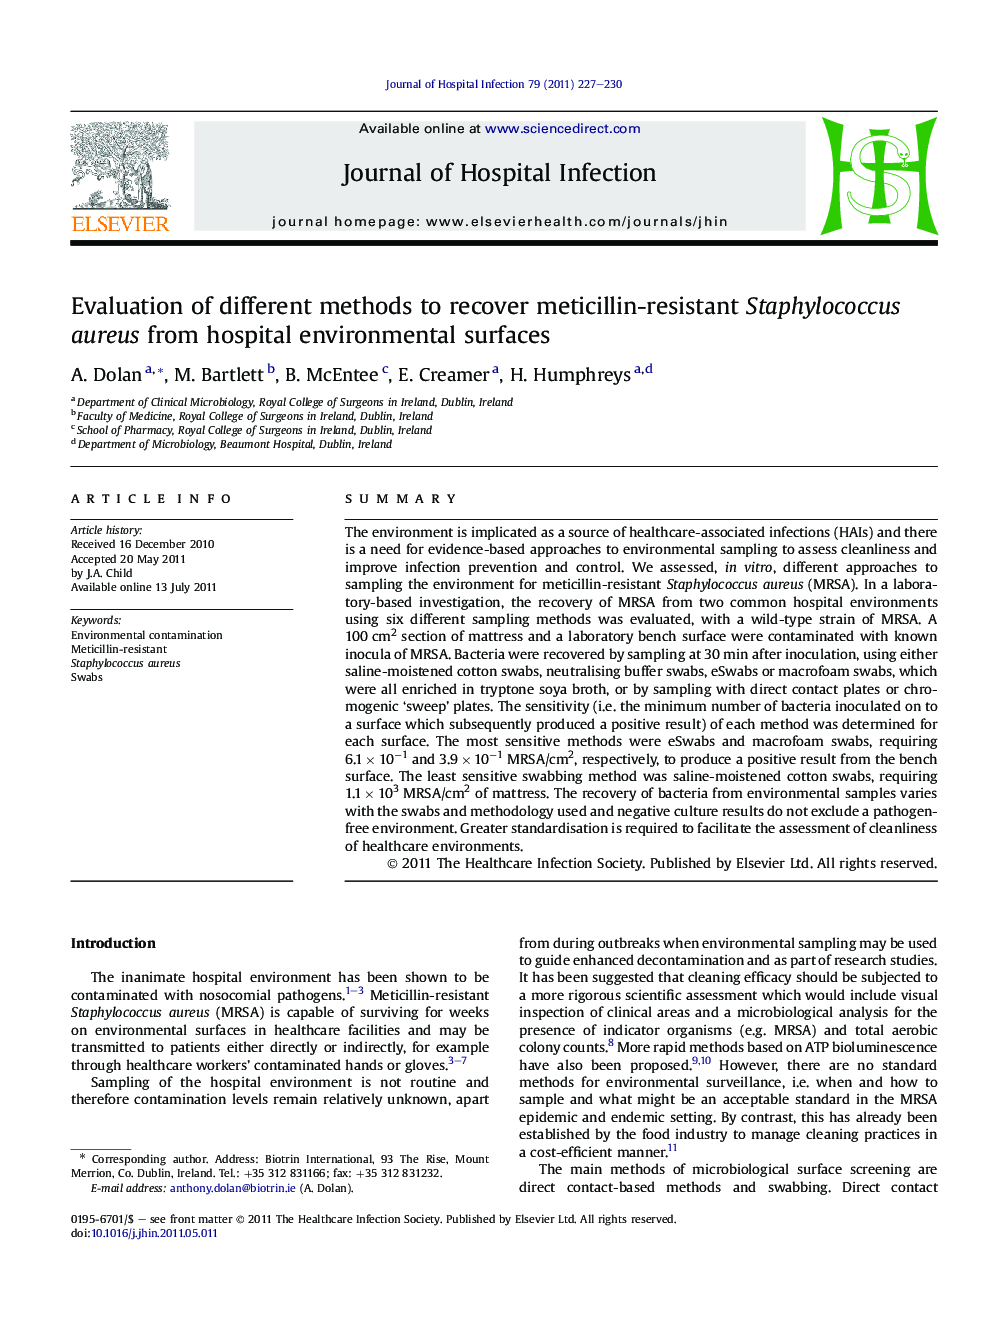 Evaluation of different methods to recover meticillin-resistant Staphylococcus aureus from hospital environmental surfaces